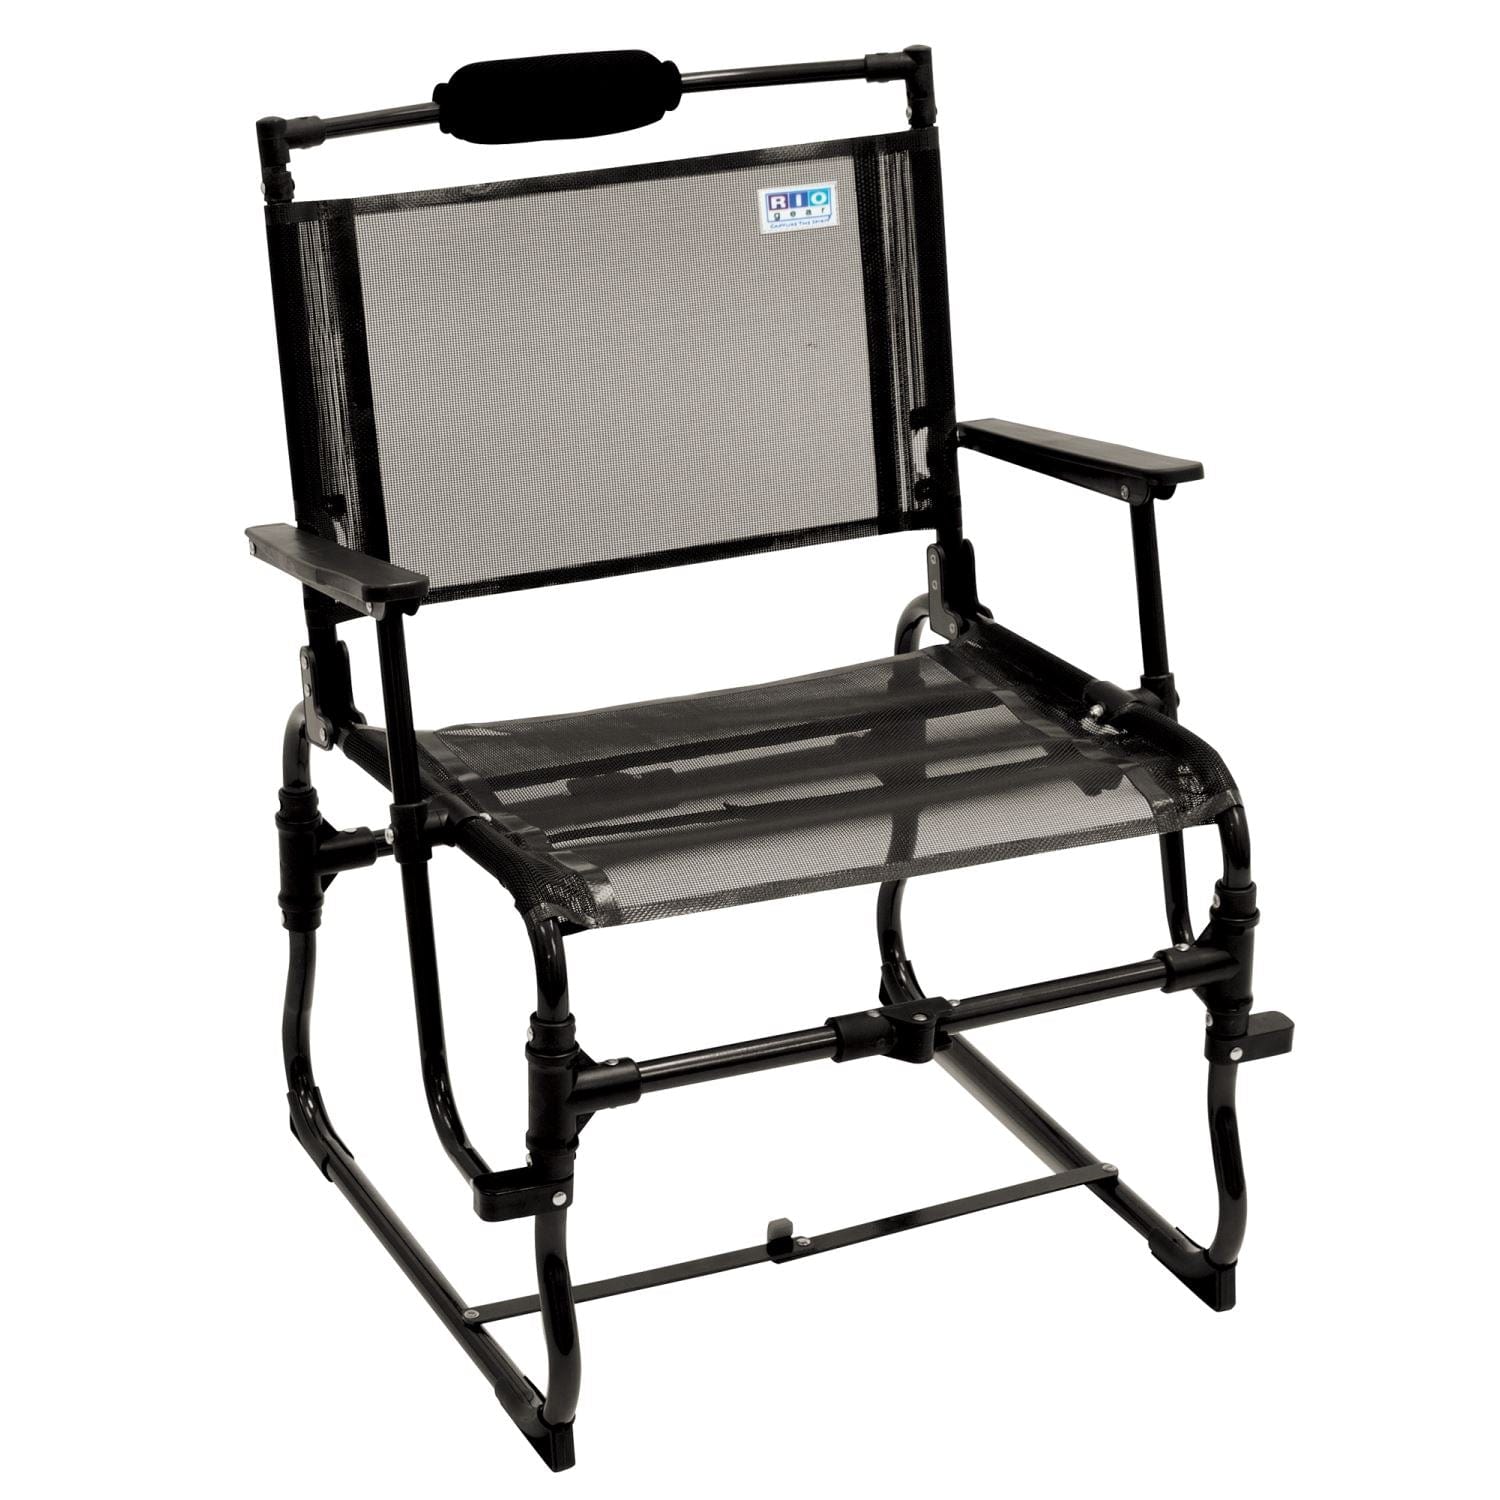 RIO Chair RIO Gear | Compact Traveler Large 12.5" Seat Height with Hard Arms DFC104-10-1